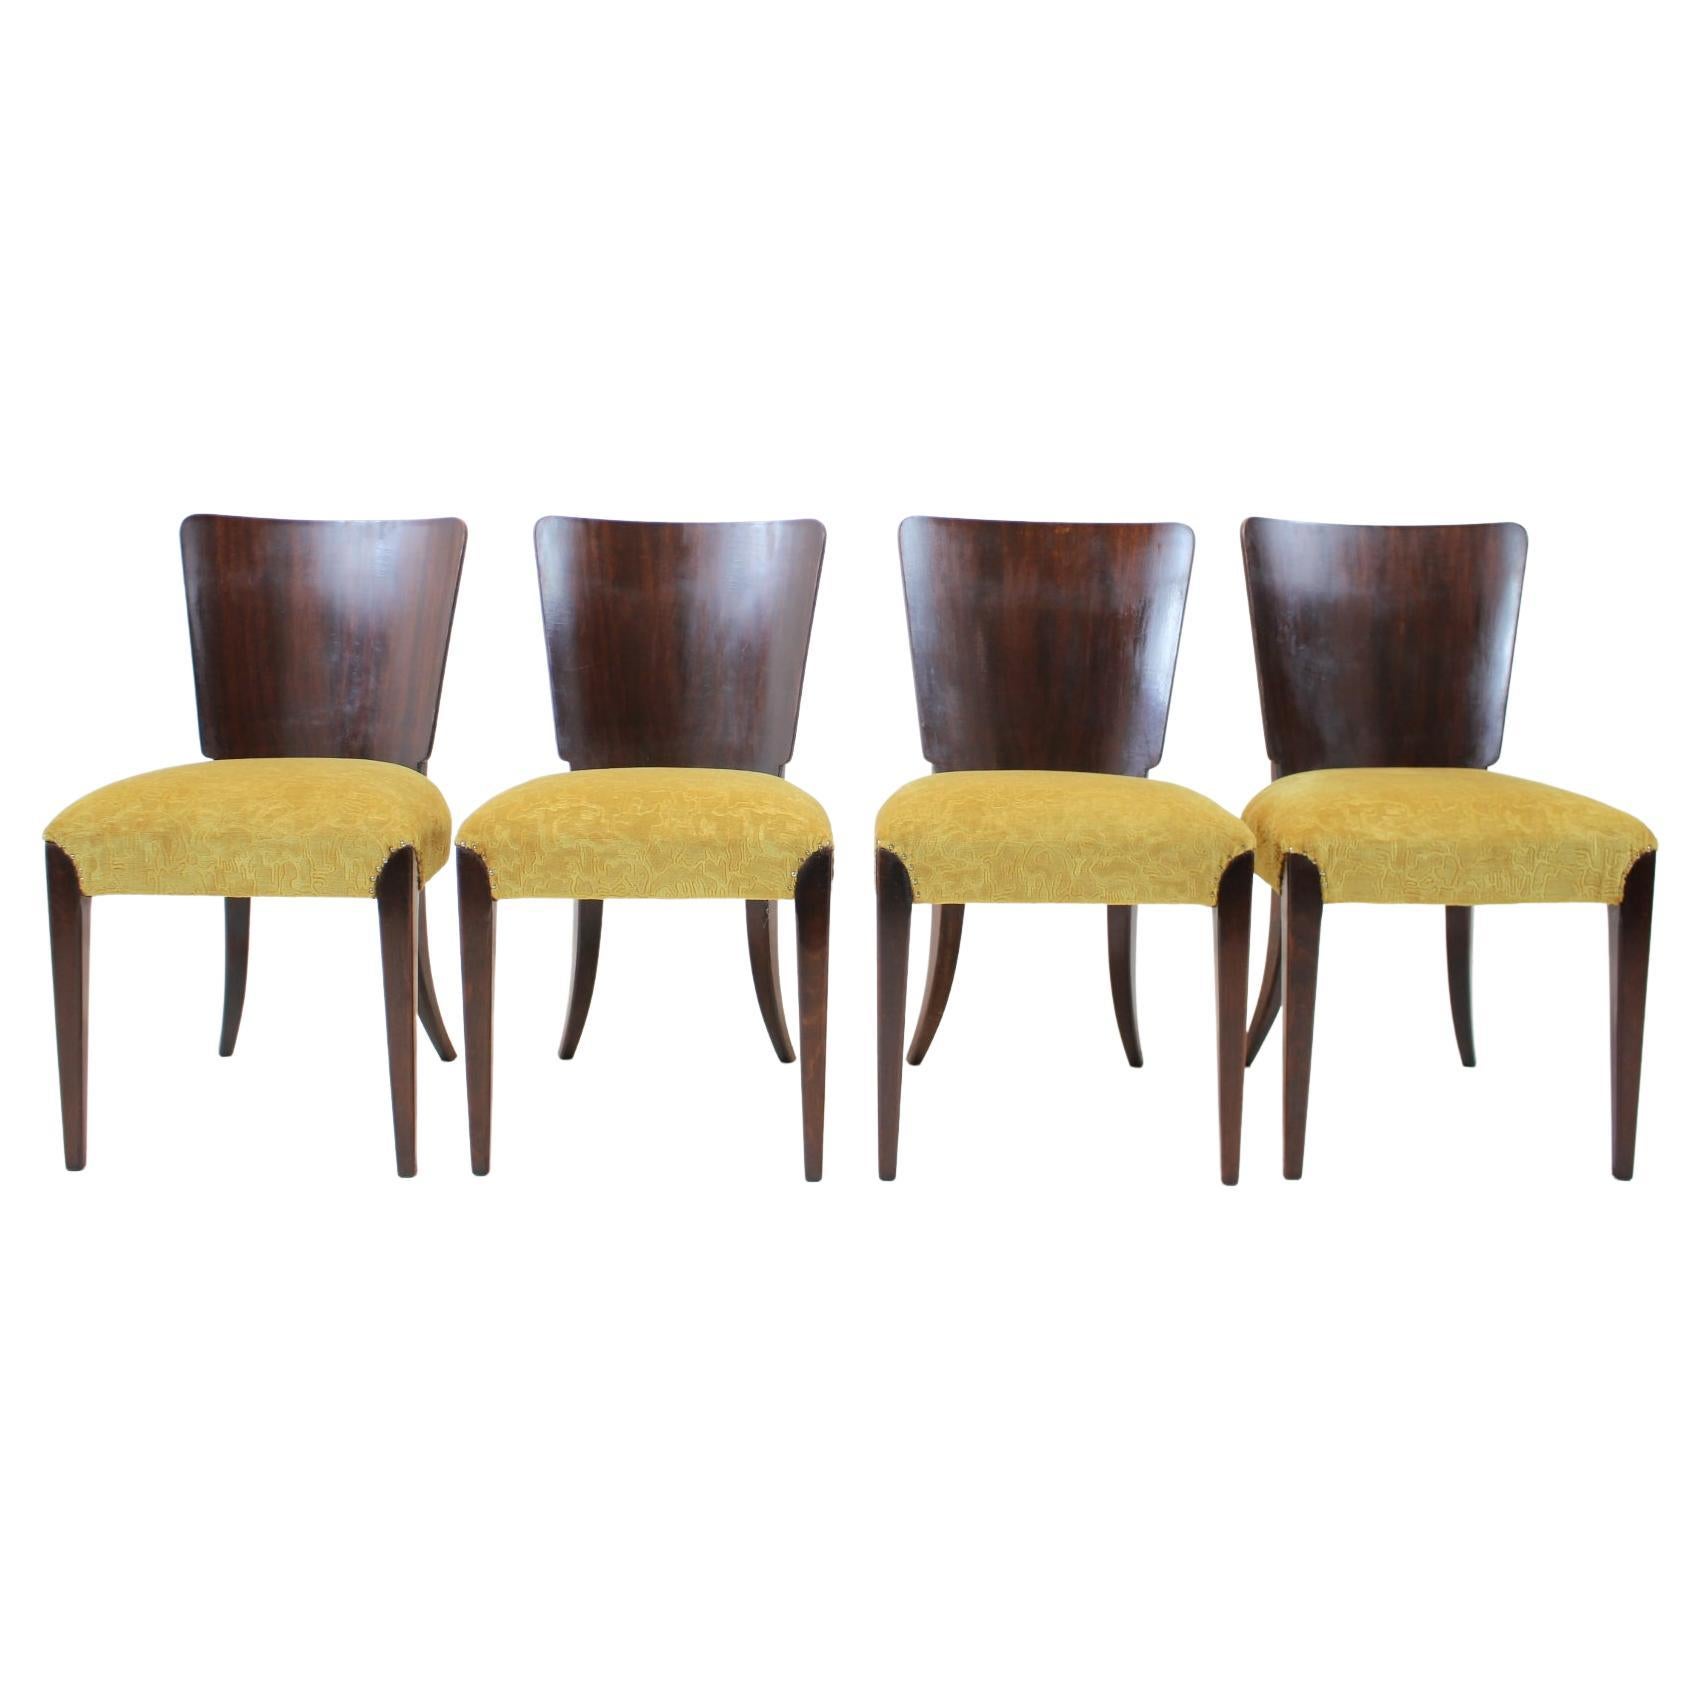 Art Deco Dining Chairs H-214 by Jindrich Halabala for UP Závody, Set of 4